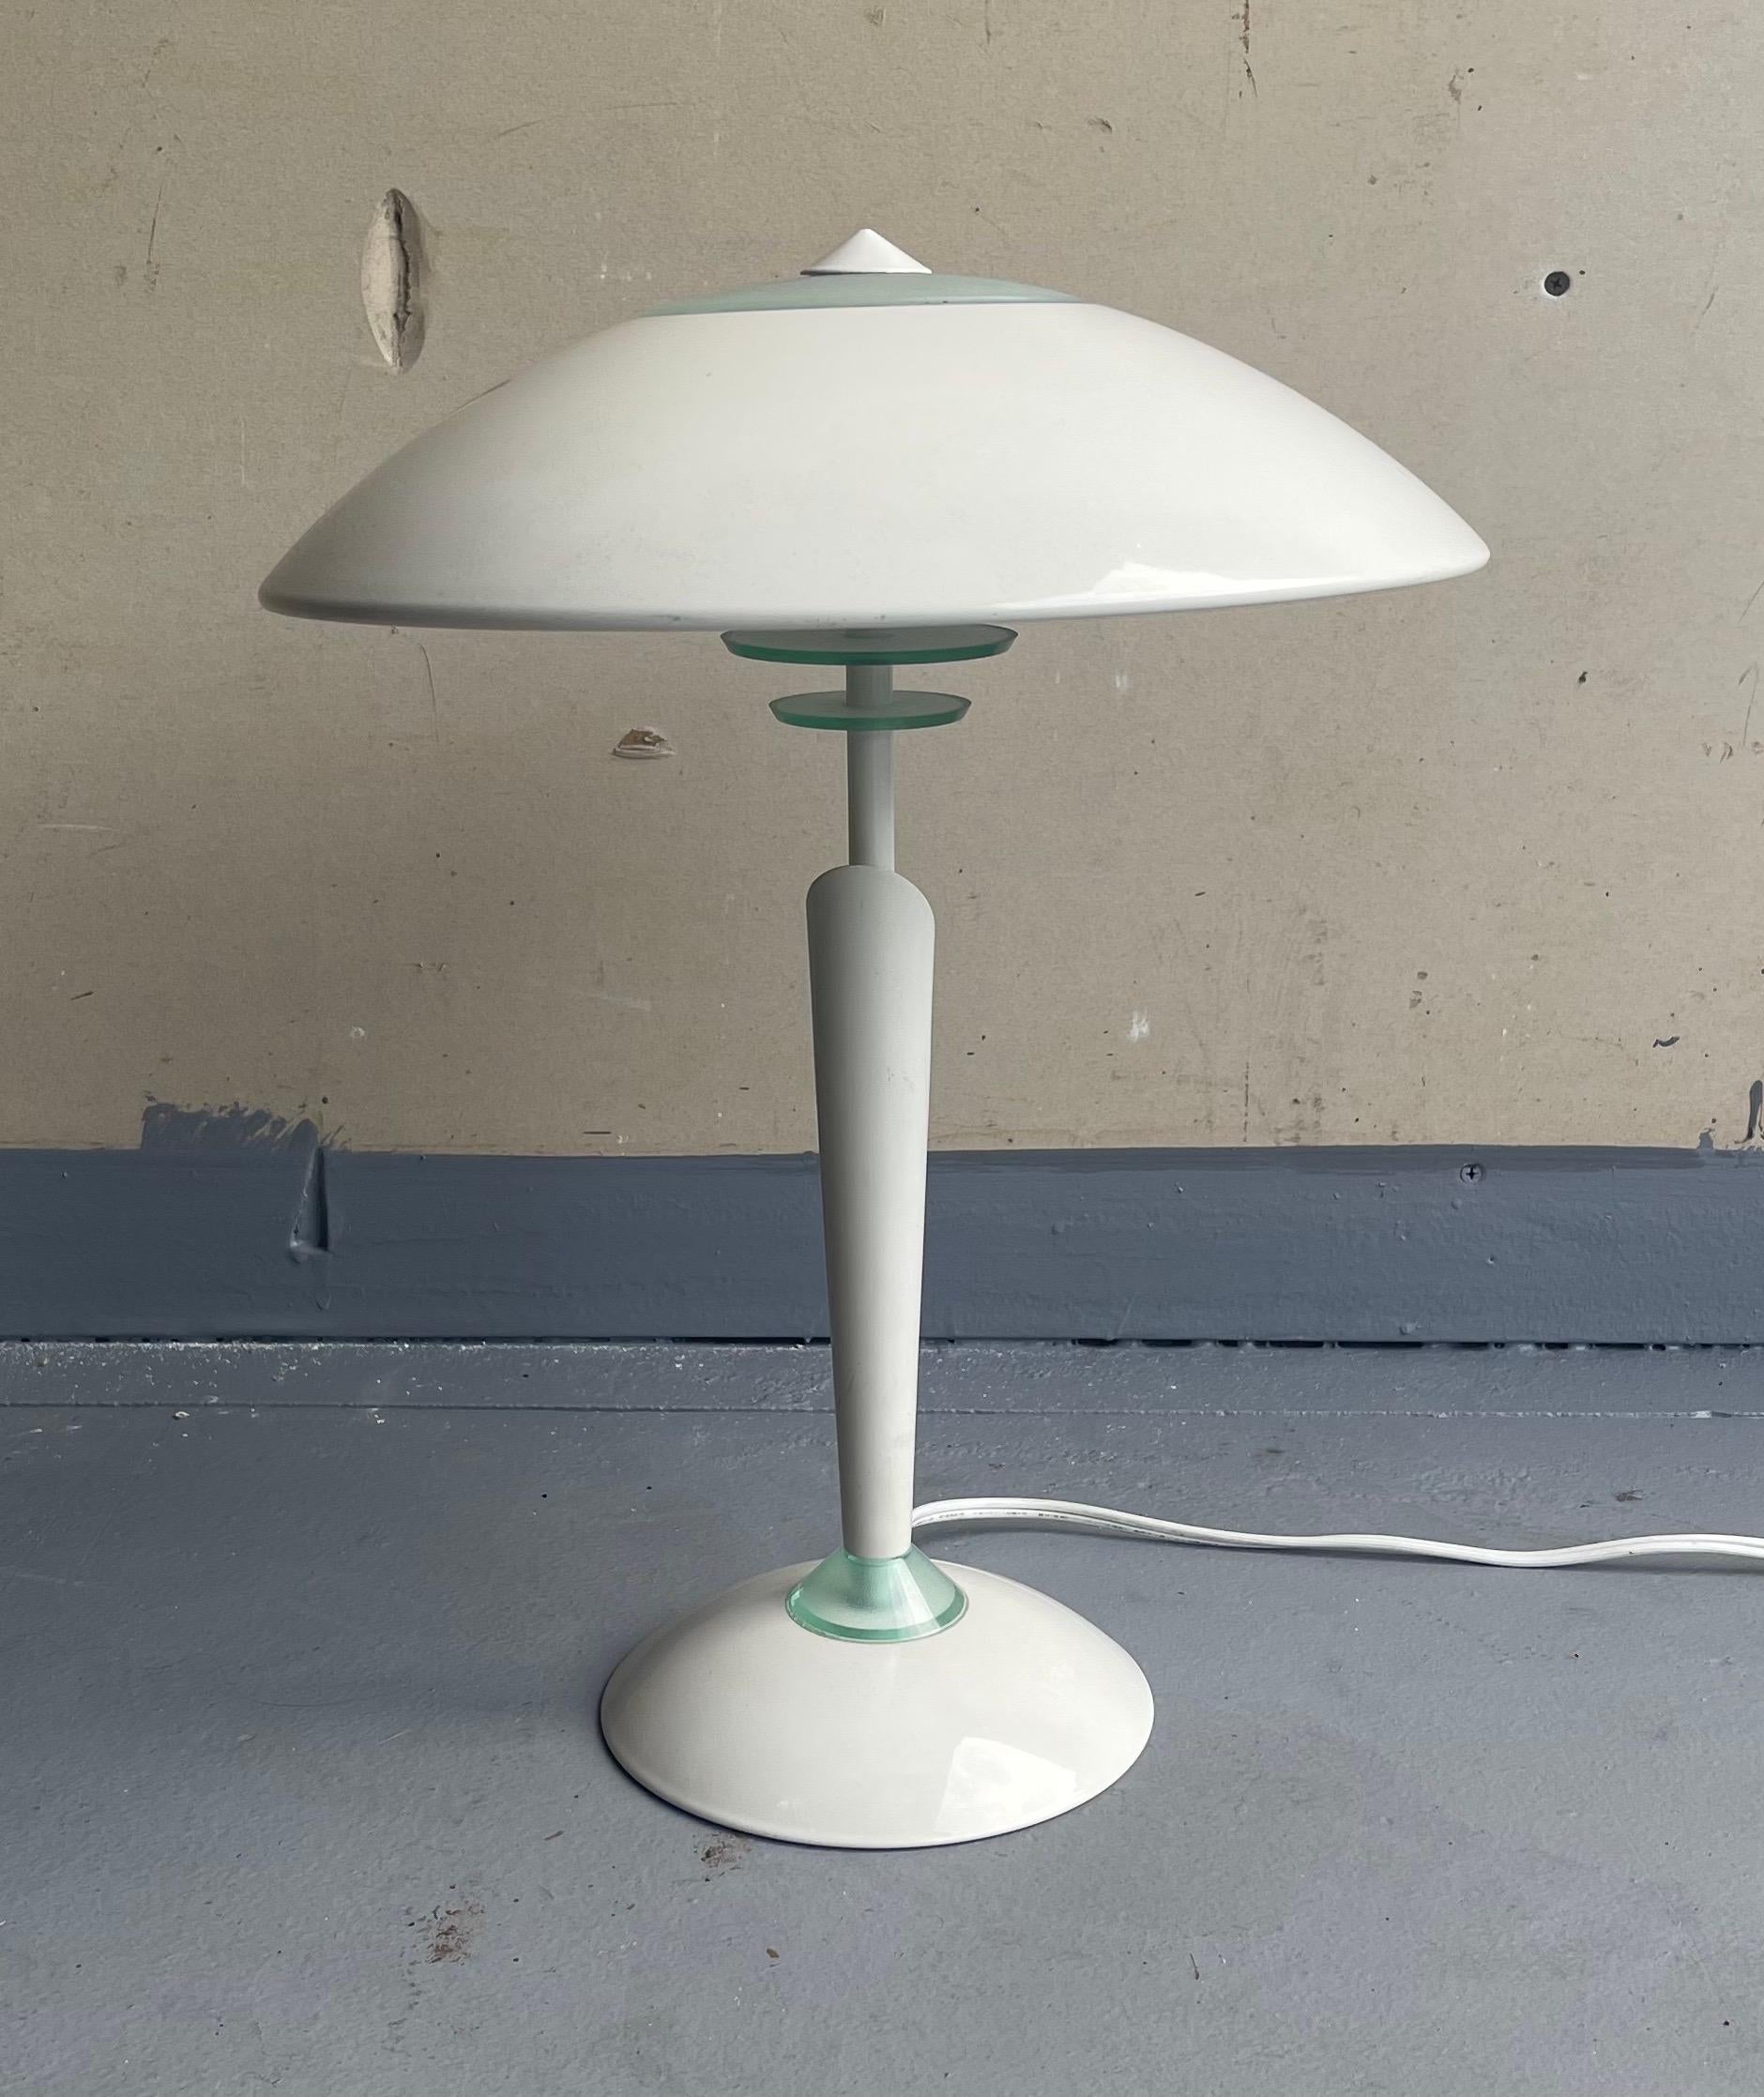 A very cool mid-century space age saucer table lamp, circa 1970s. The lamp has a white finish with glass accents and a three-way lamp that can be adjusted by touching the base. It is in very good vintage condition and measures 13